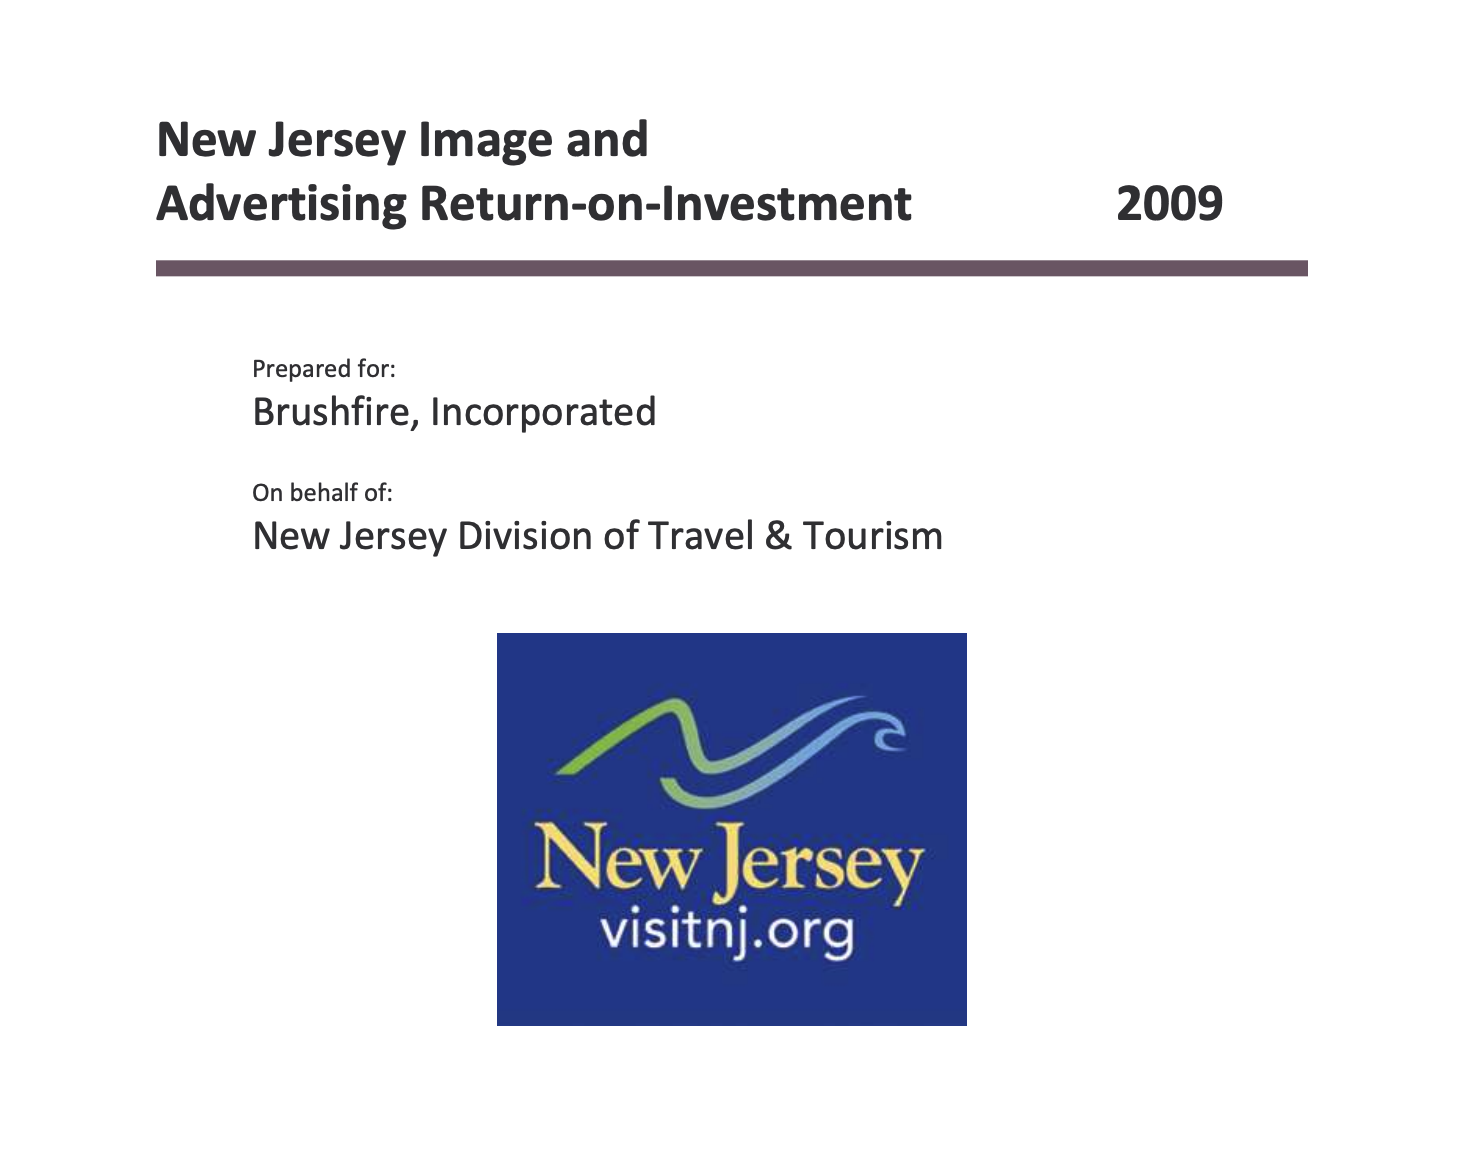 New Jersey Image and Advertising Return-on-Investment